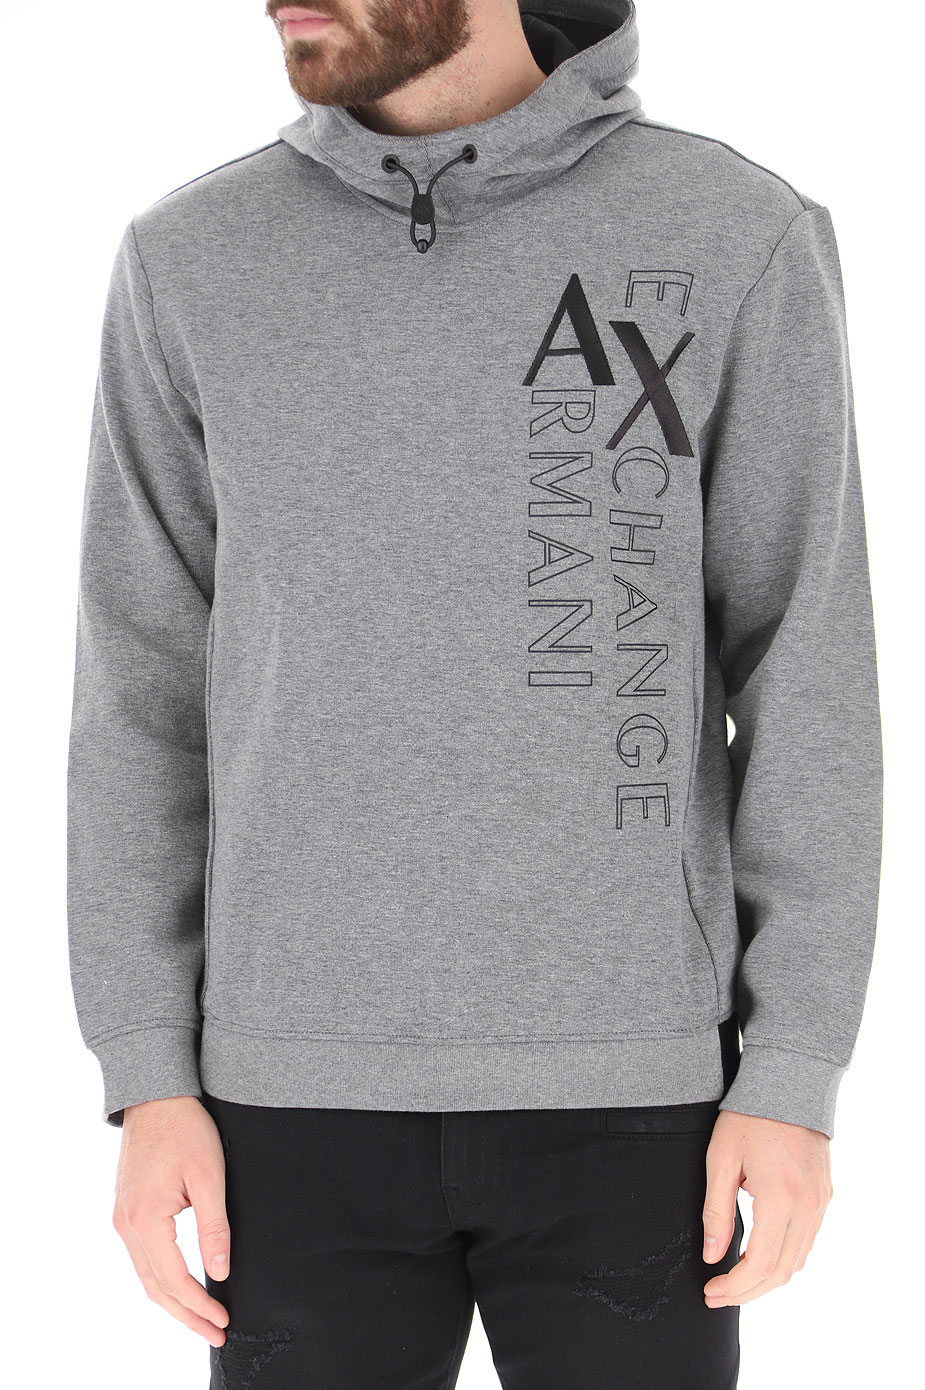 Mens Clothing Armani Exchange, Style code: 6hzmfh-zjy2z-5945